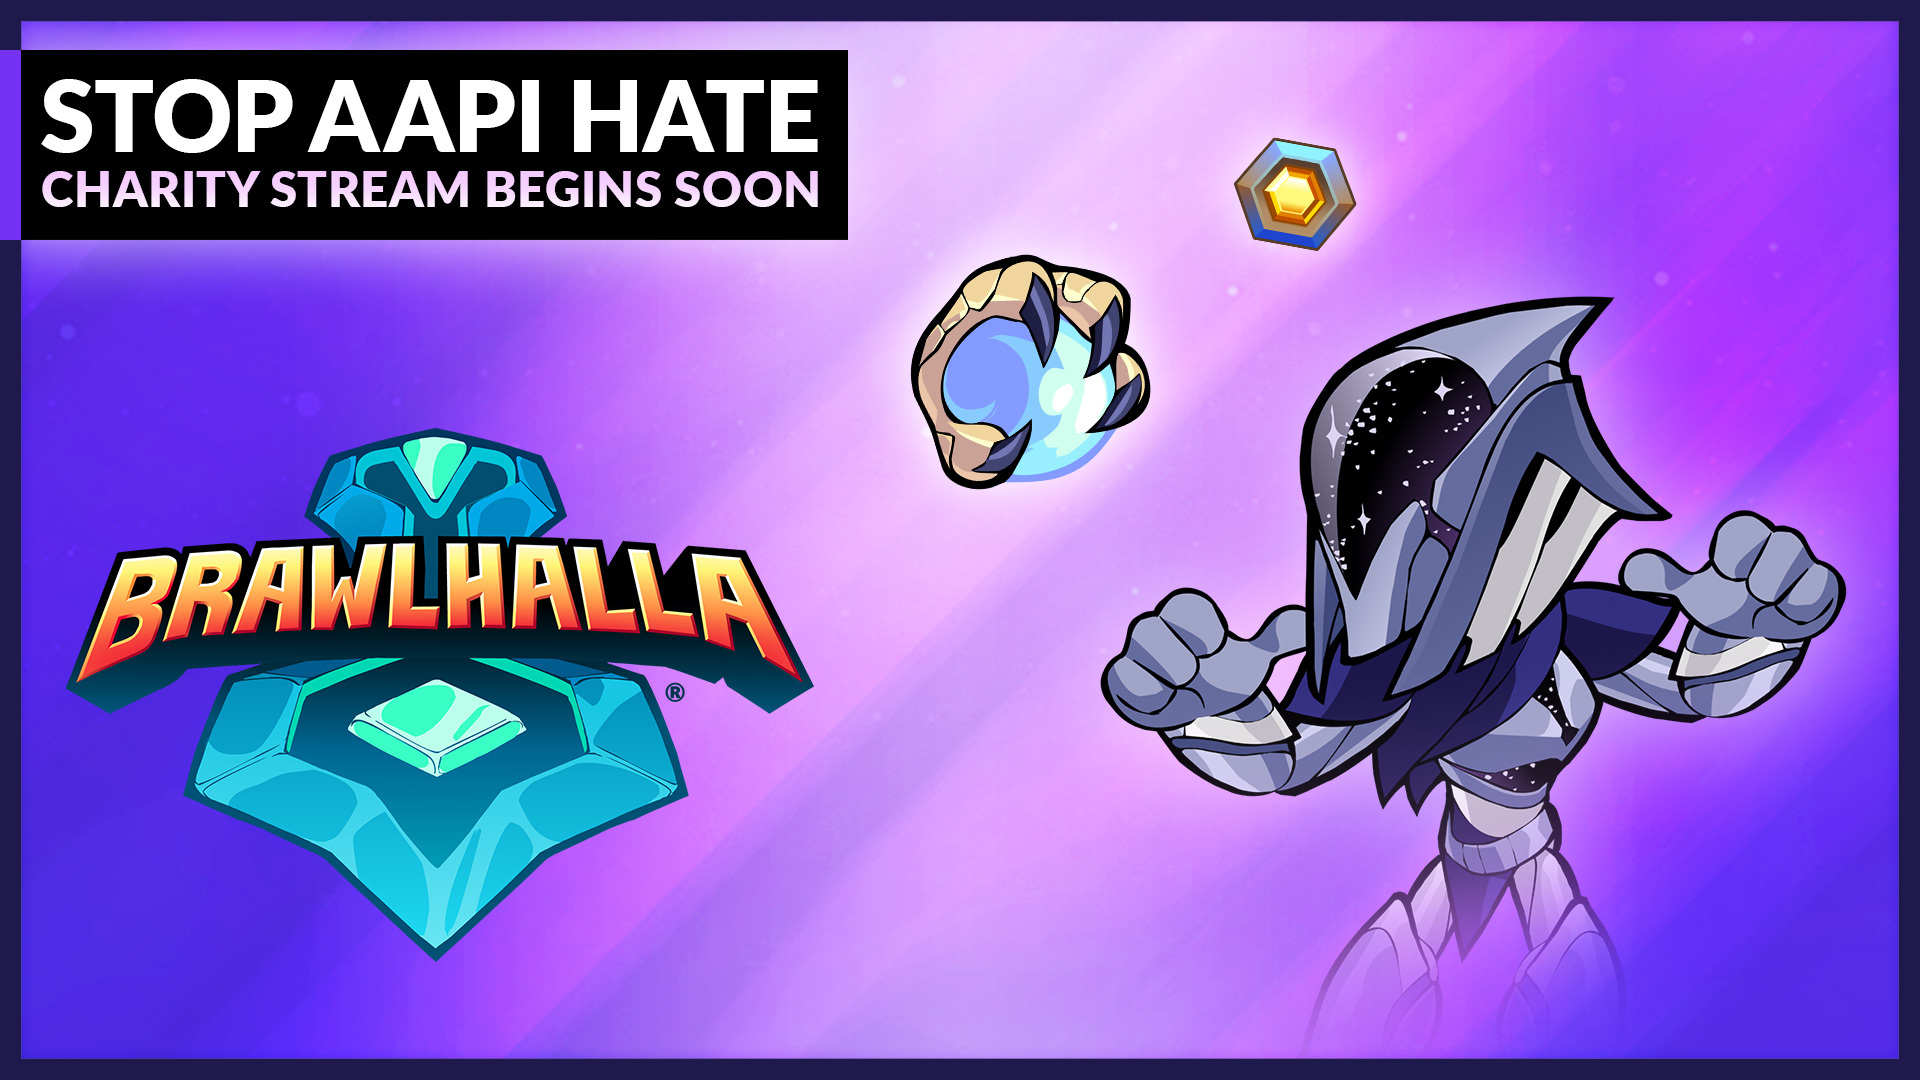 Kind of crazy the amount of free items you can get with Brawlhalla streams  and prime : r/Brawlhalla